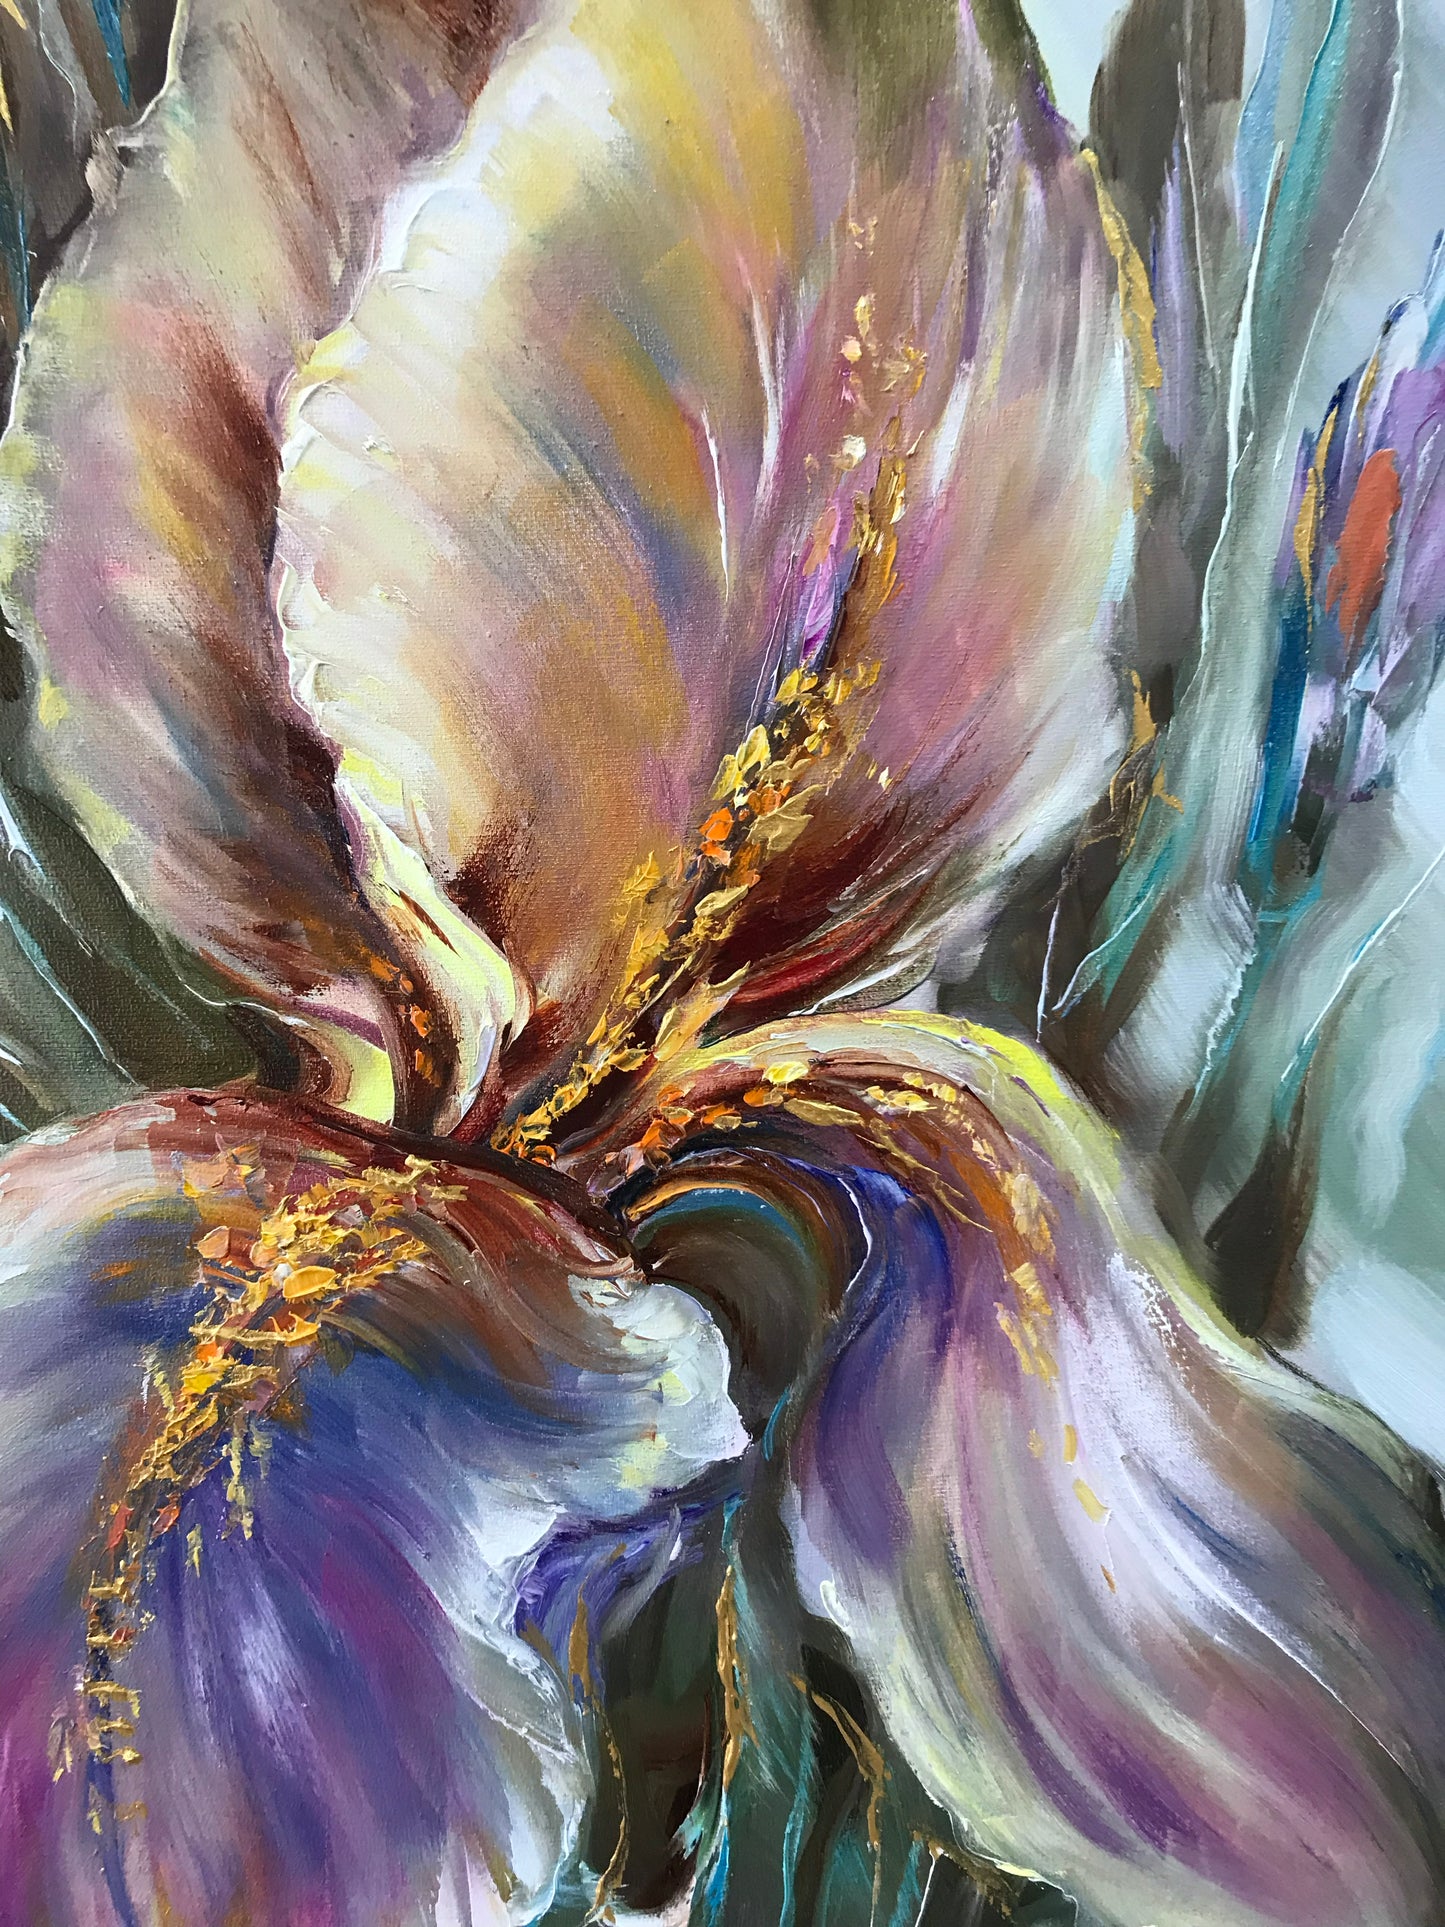 Iris Flower Oil Painting Original Oversized Abstract Floral Painting on Canvas Modern Art Extra Large Iris Artwork